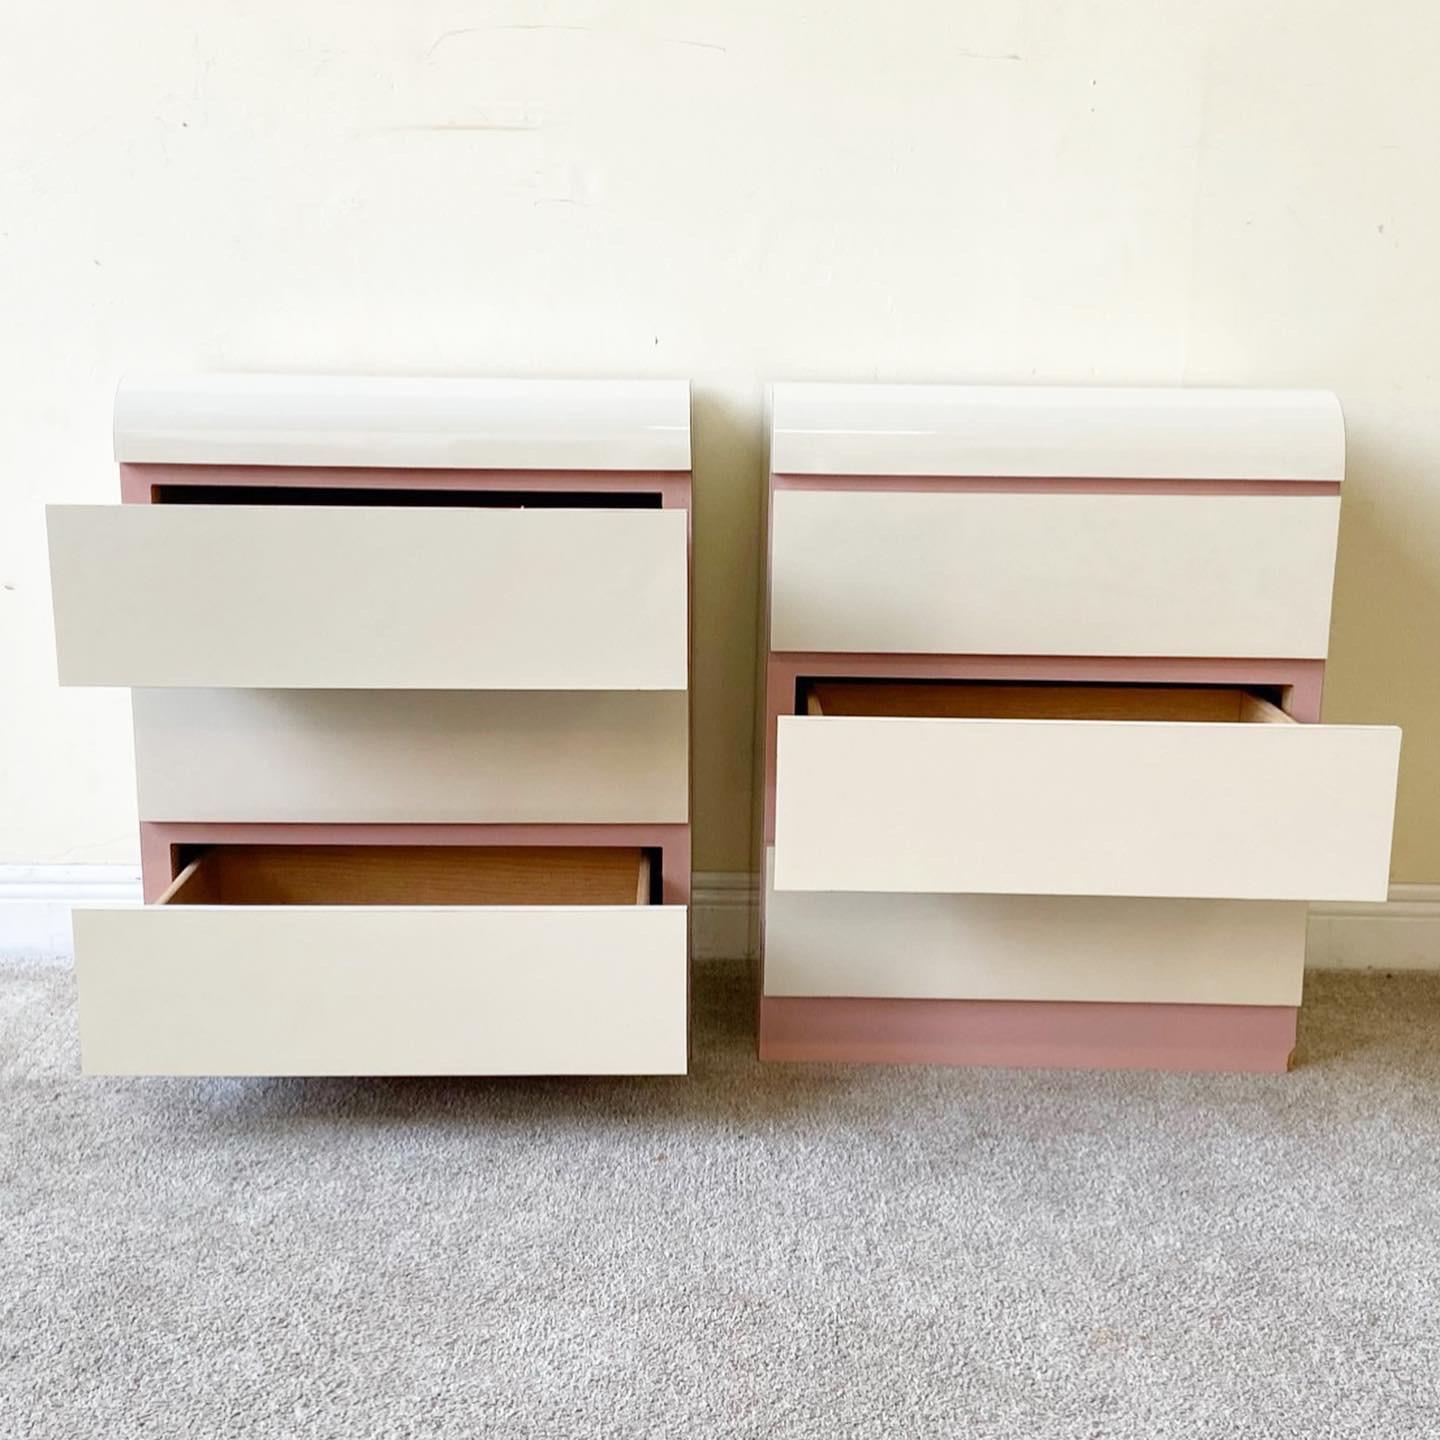 Amazing pair of waterfall nightstands with a cream and pink lacquer laminate. Each nightstand features 3 spacious drawers.
 